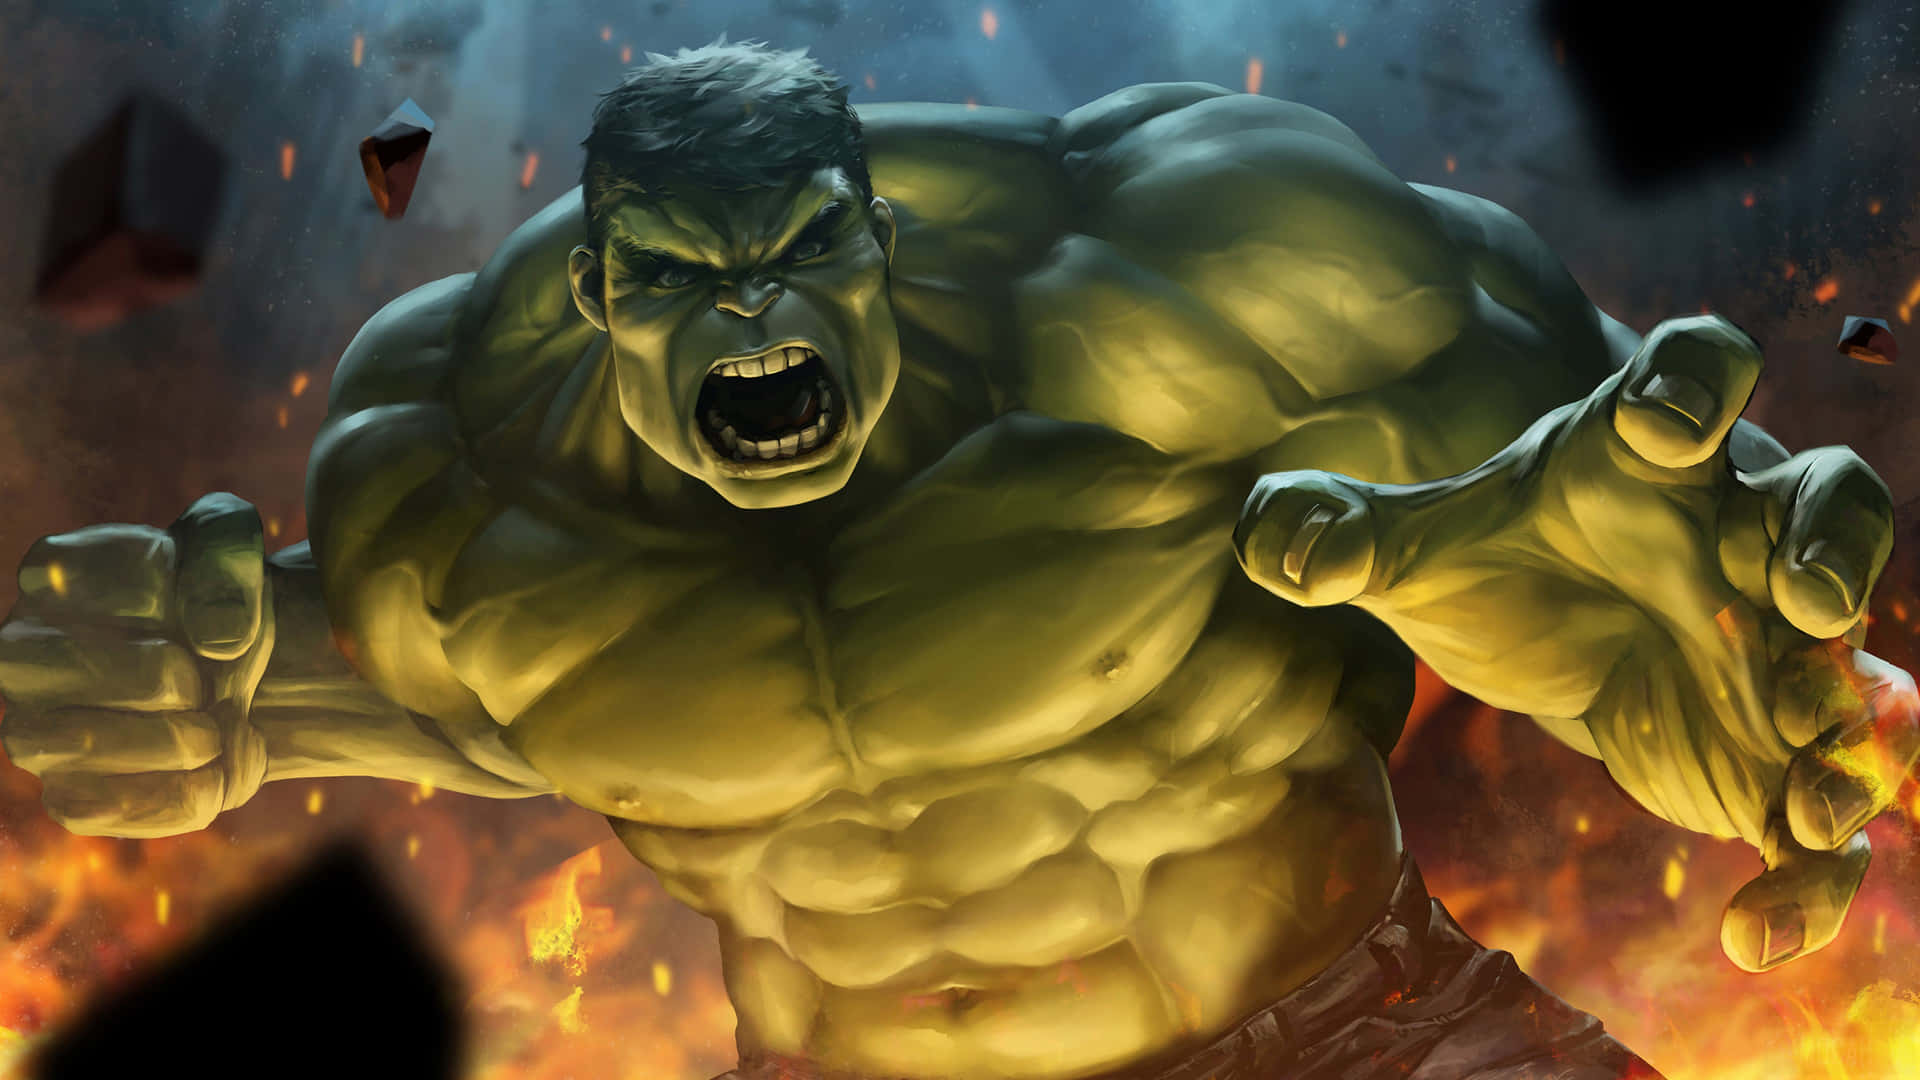 The Incredible Hulk Destroying the City